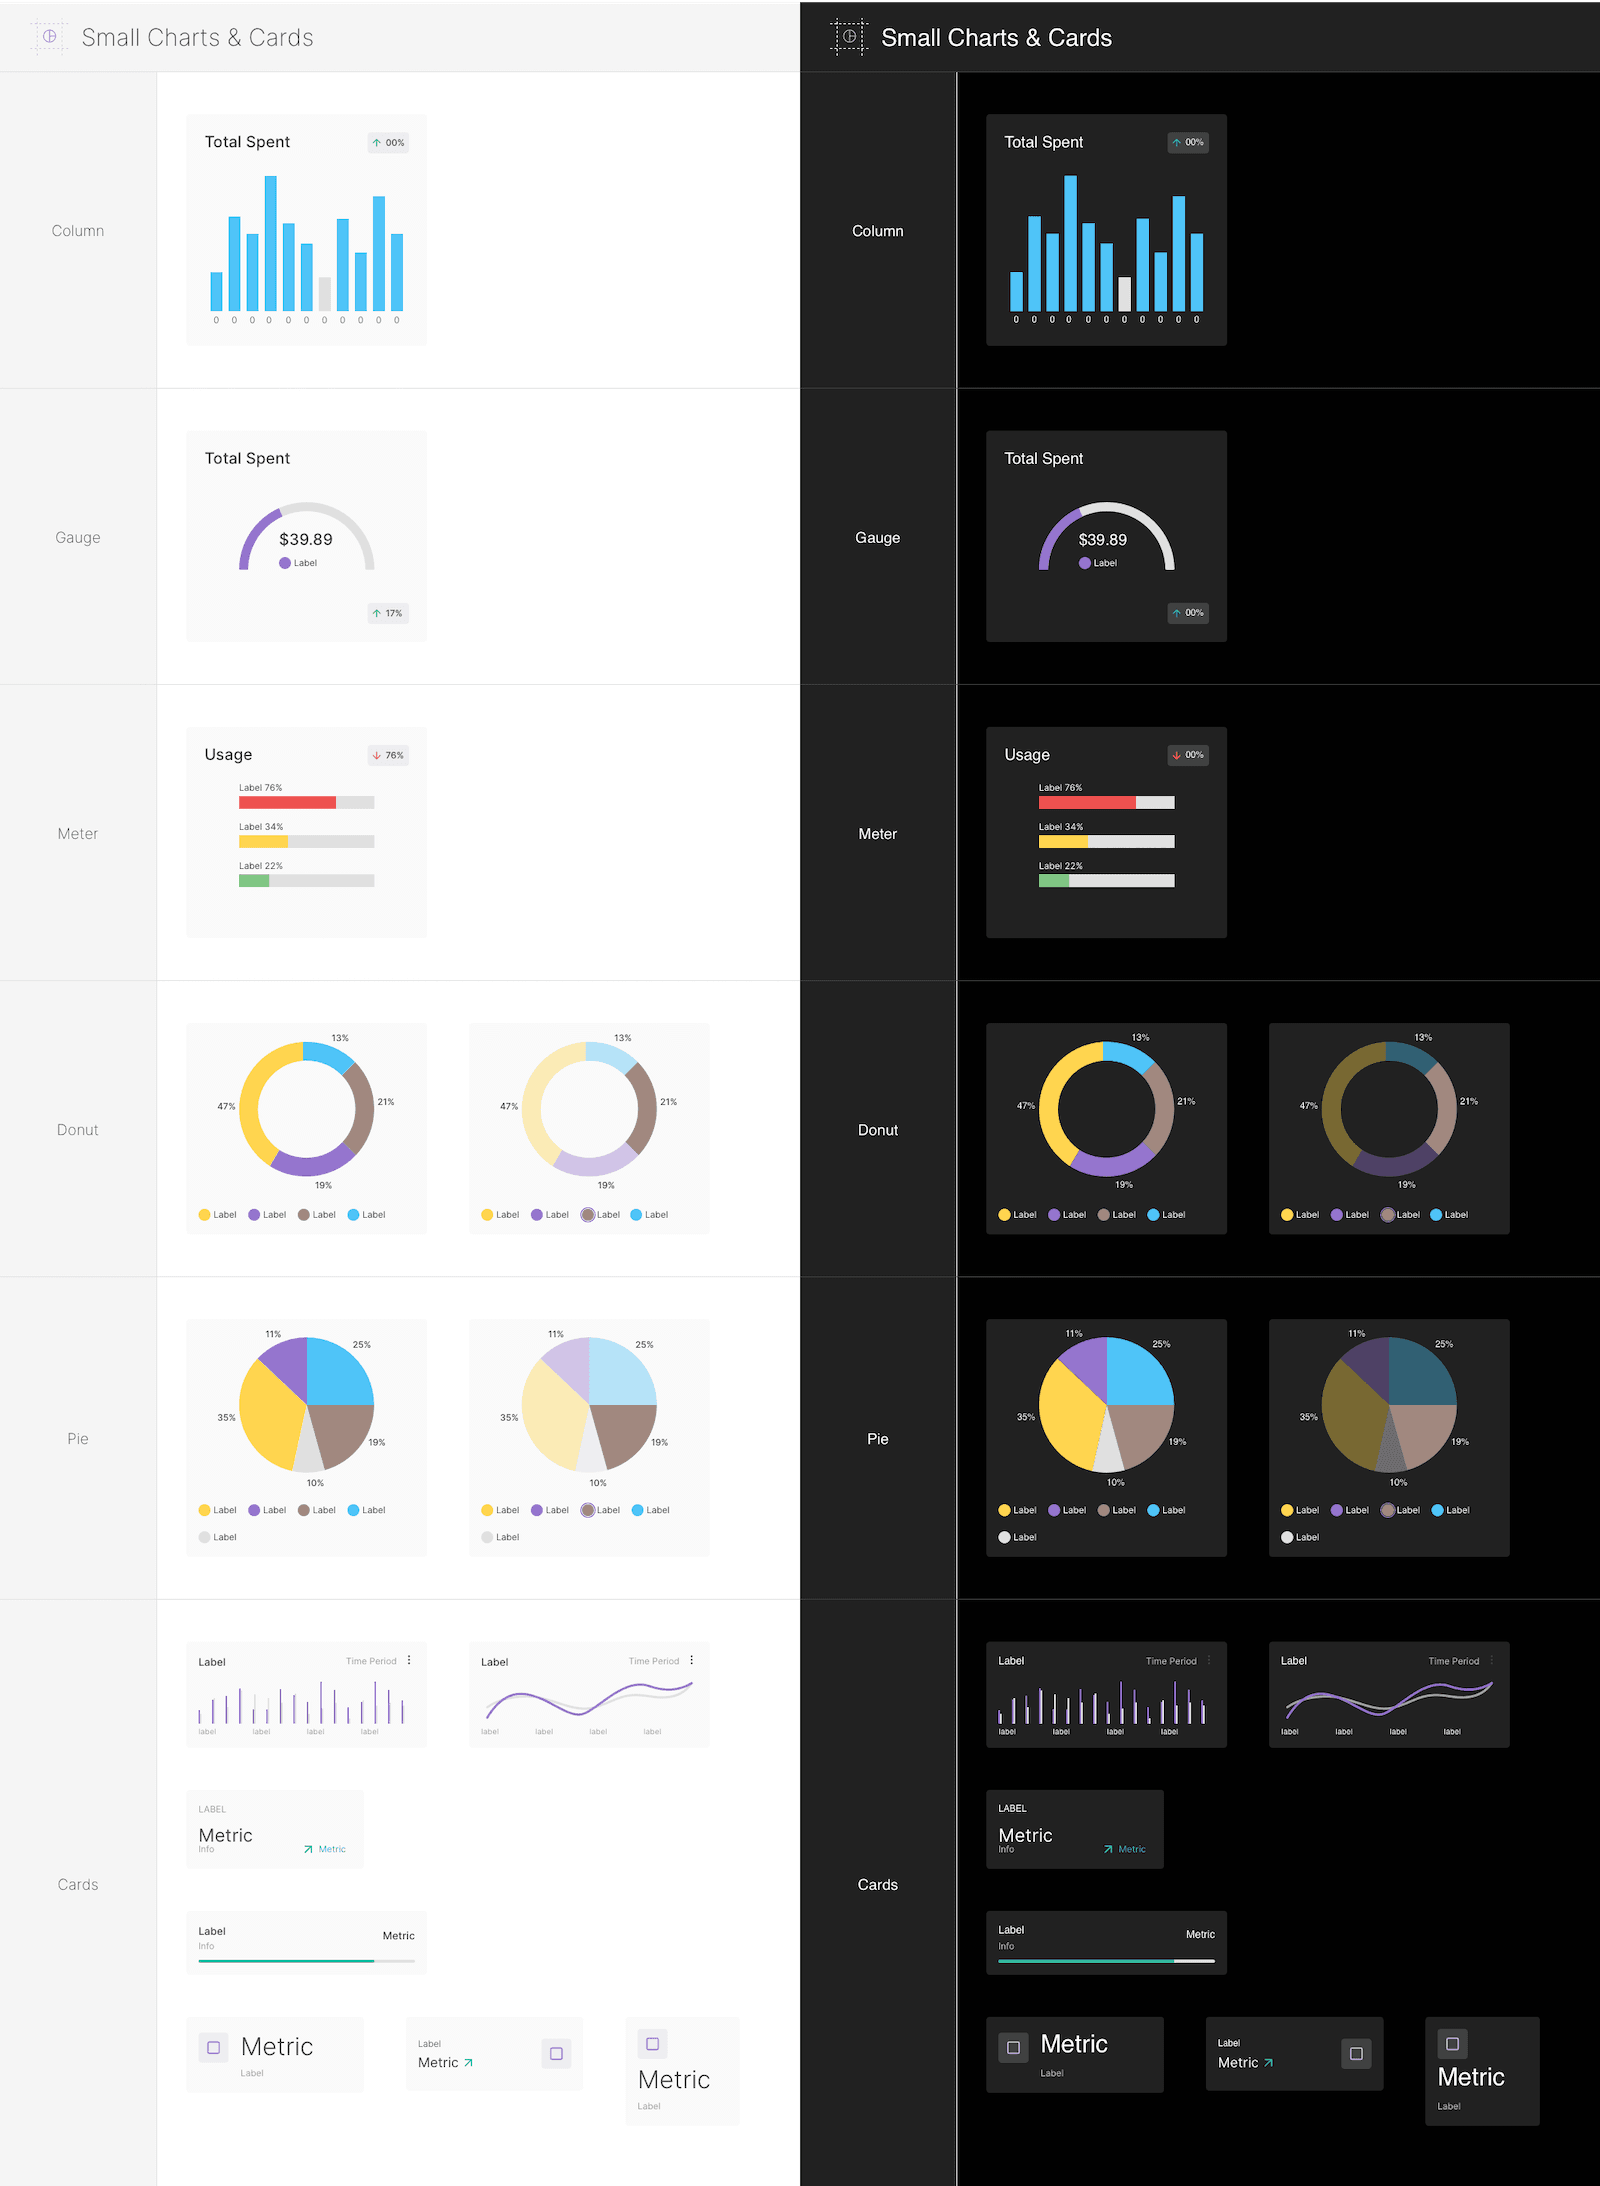 Components - Small Charts & Cards